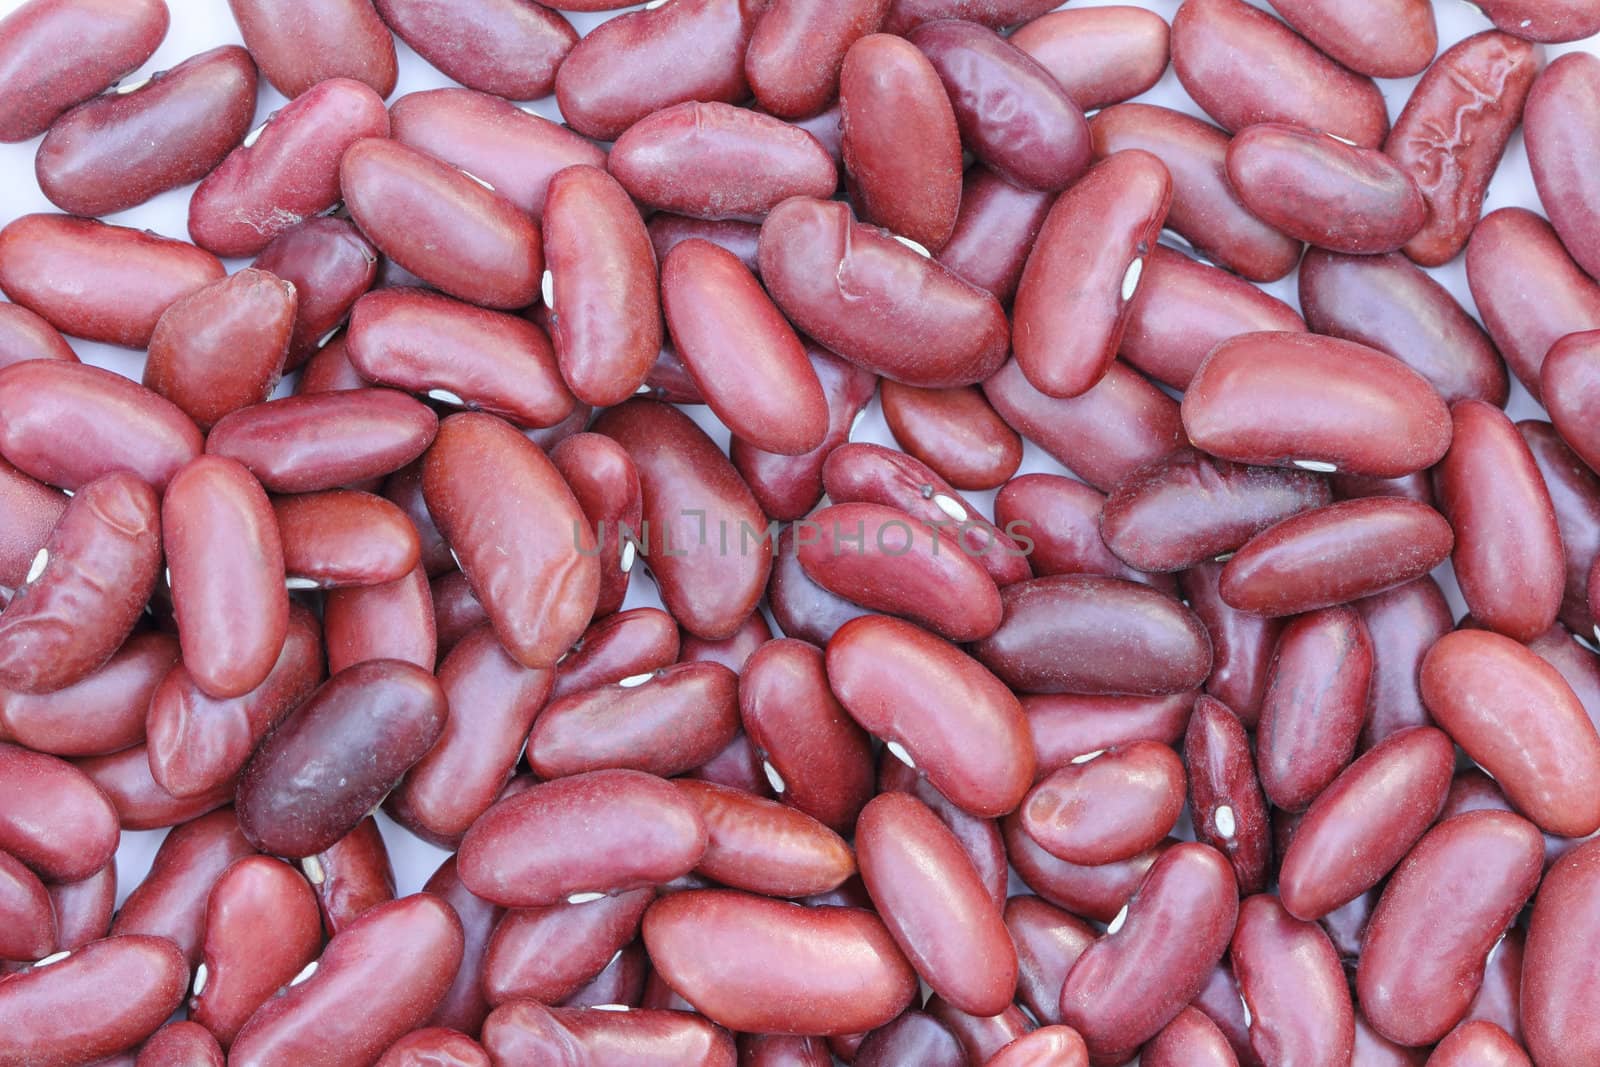 Red Kindney beans by wyoosumran